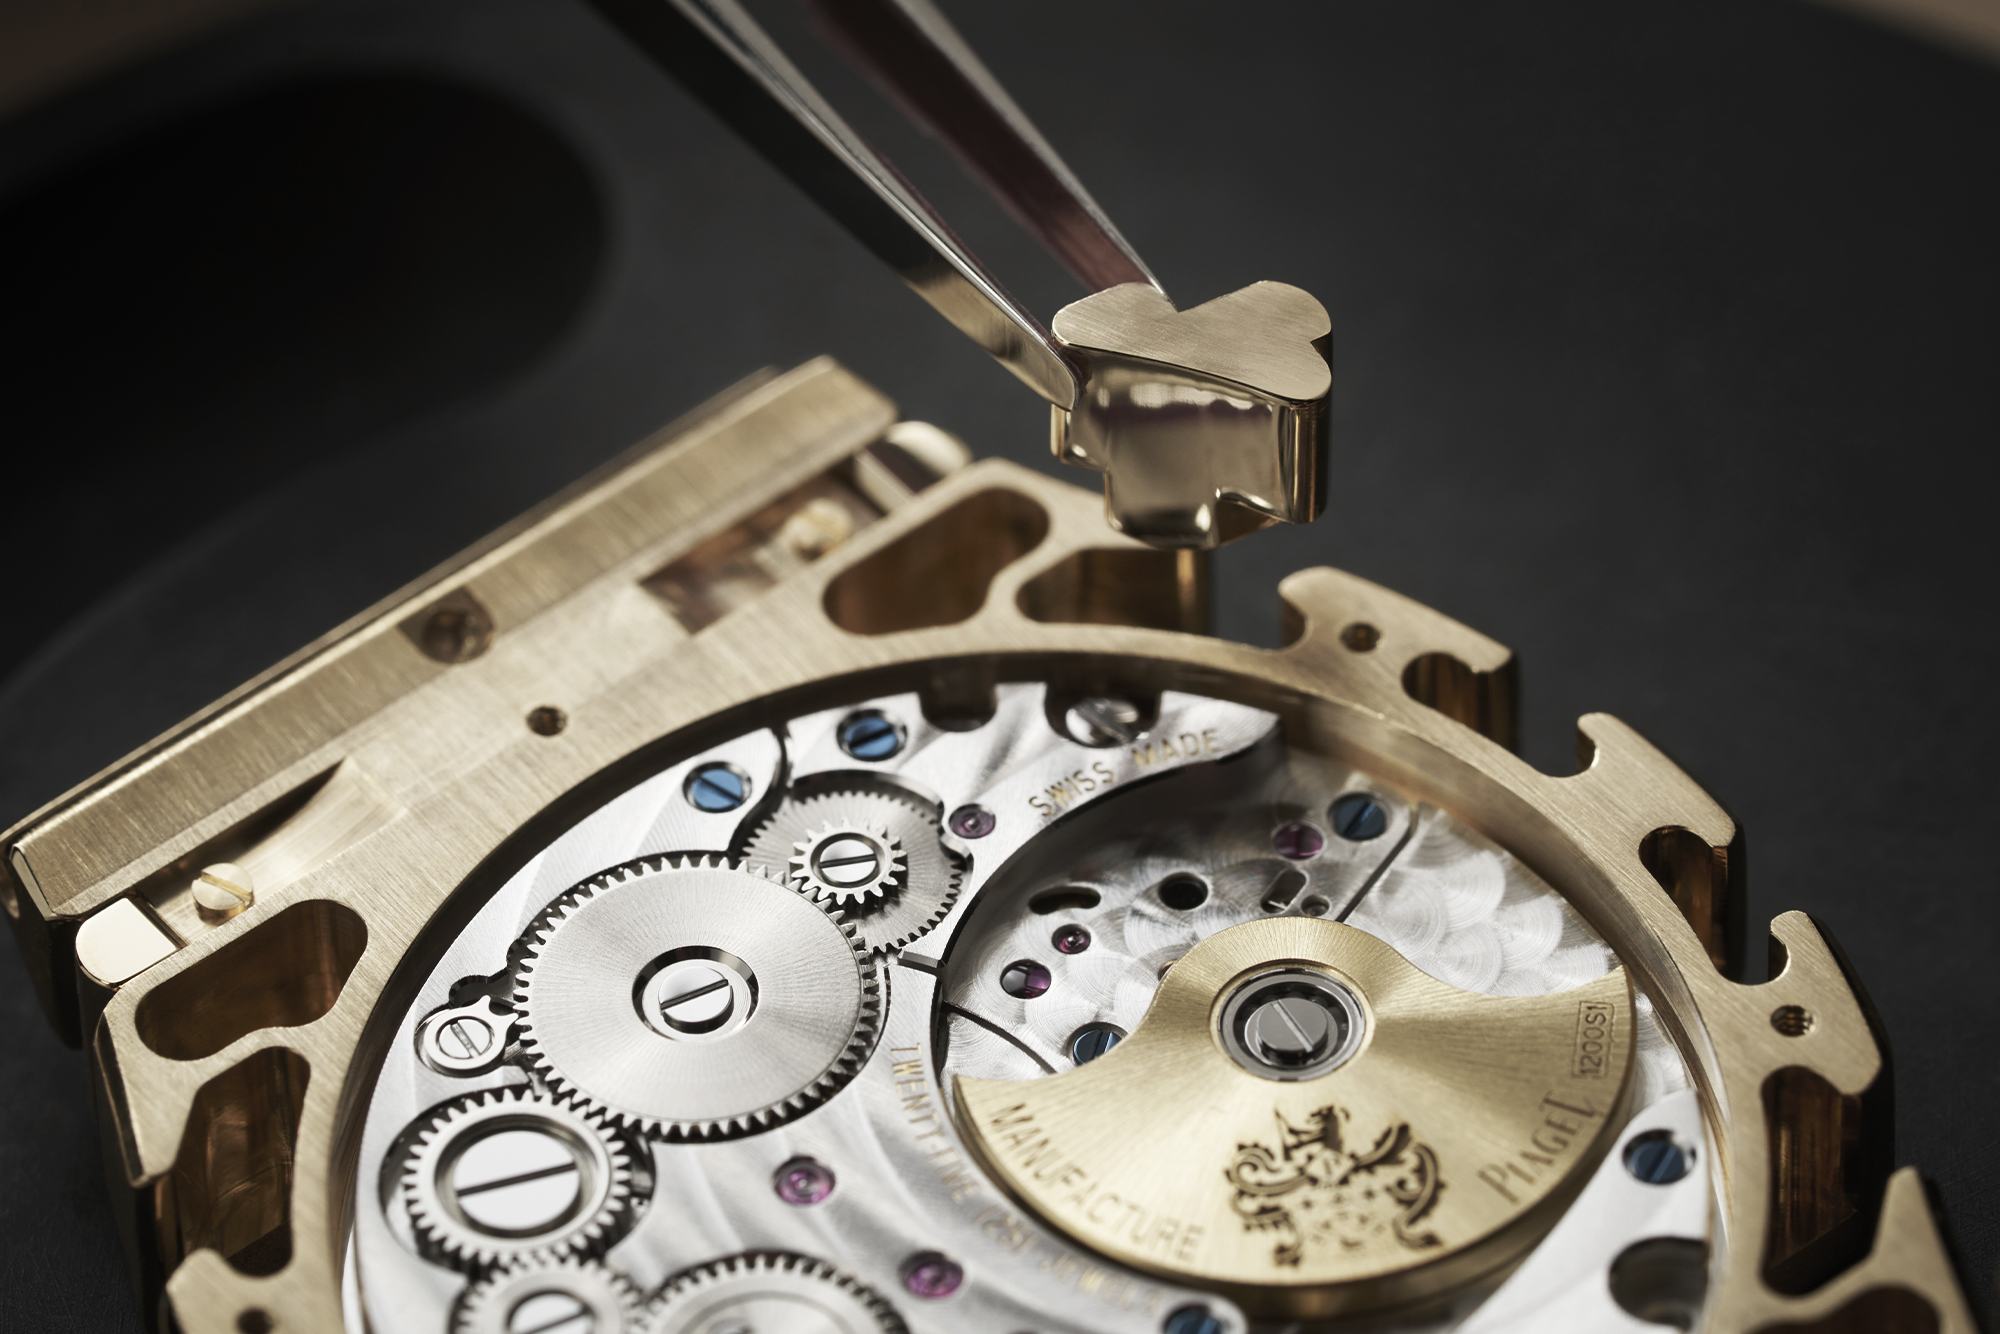 New Piaget Polo 79 being made